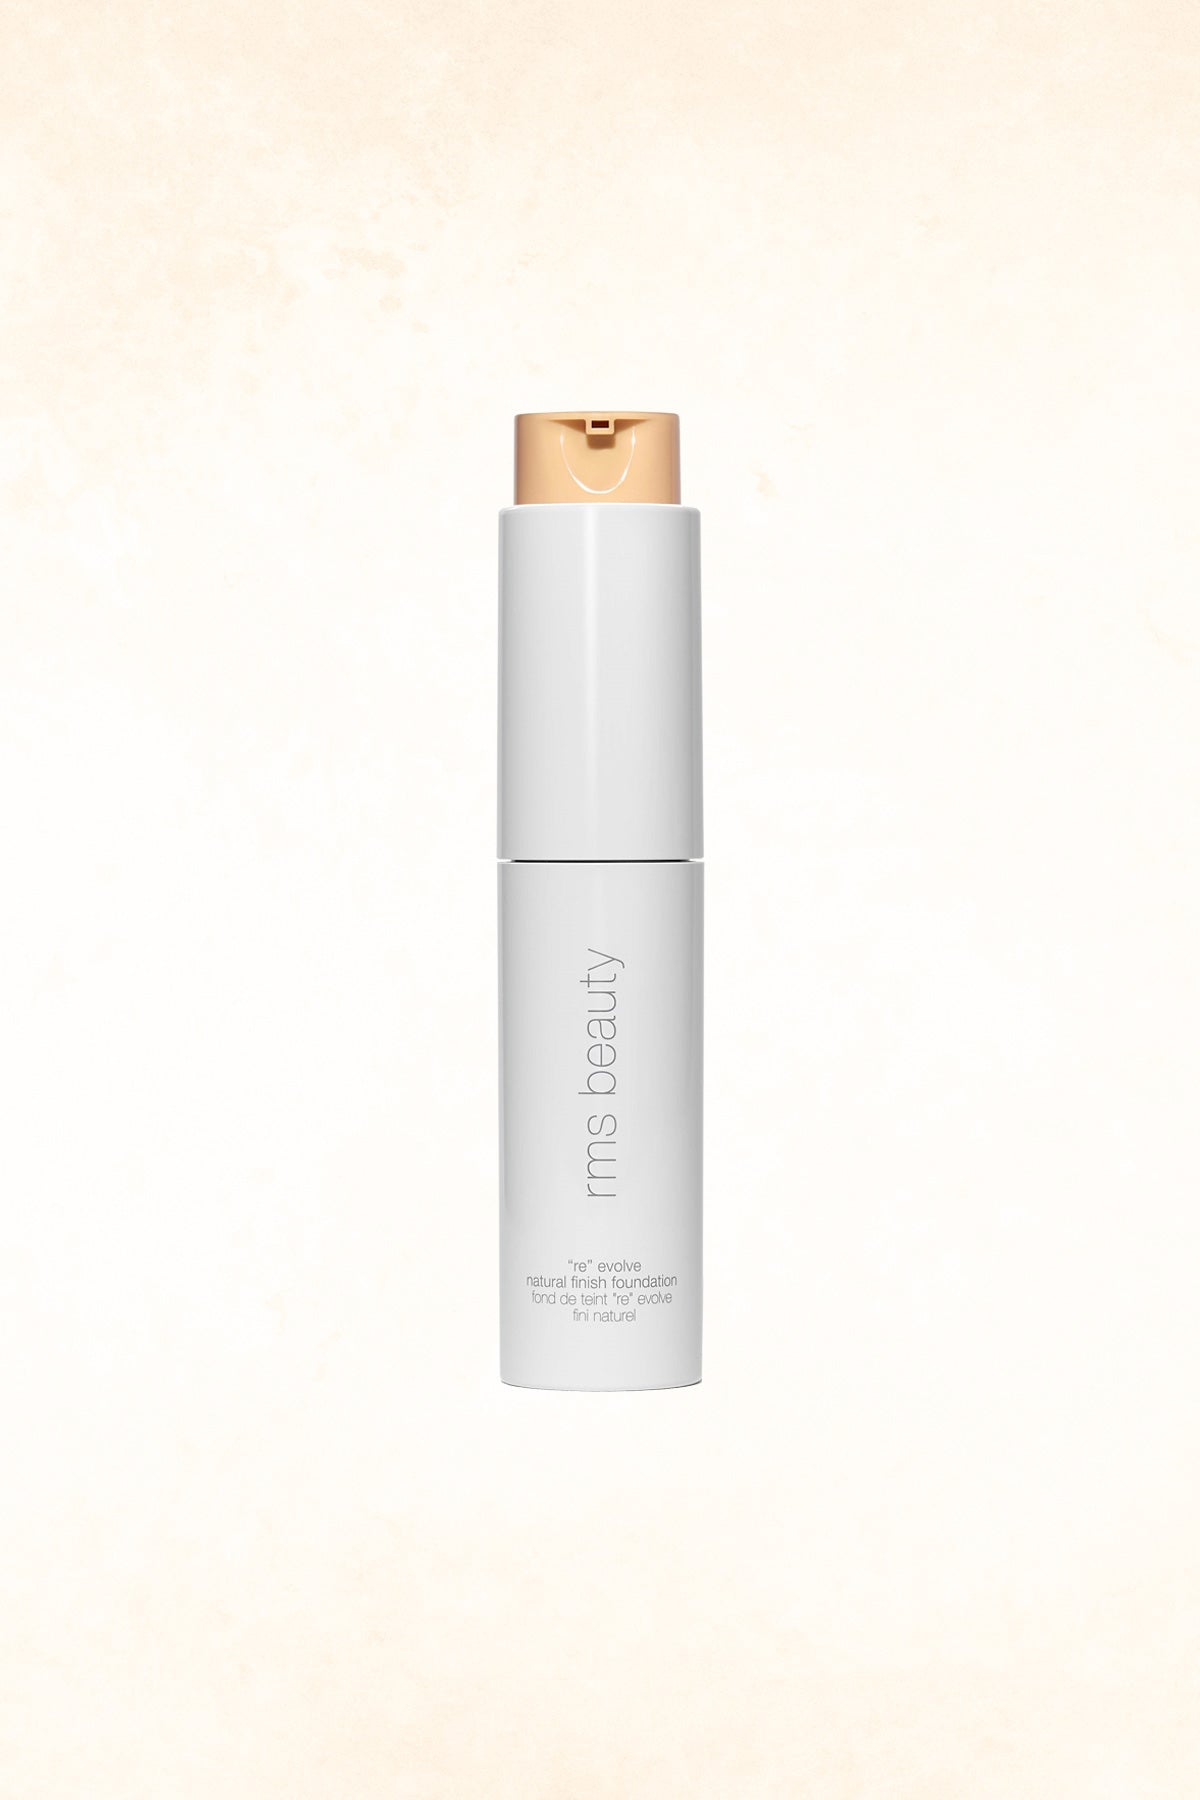 RMS Beauty – &quot;Re&quot; Evolve Natural Finish Foundation - 11